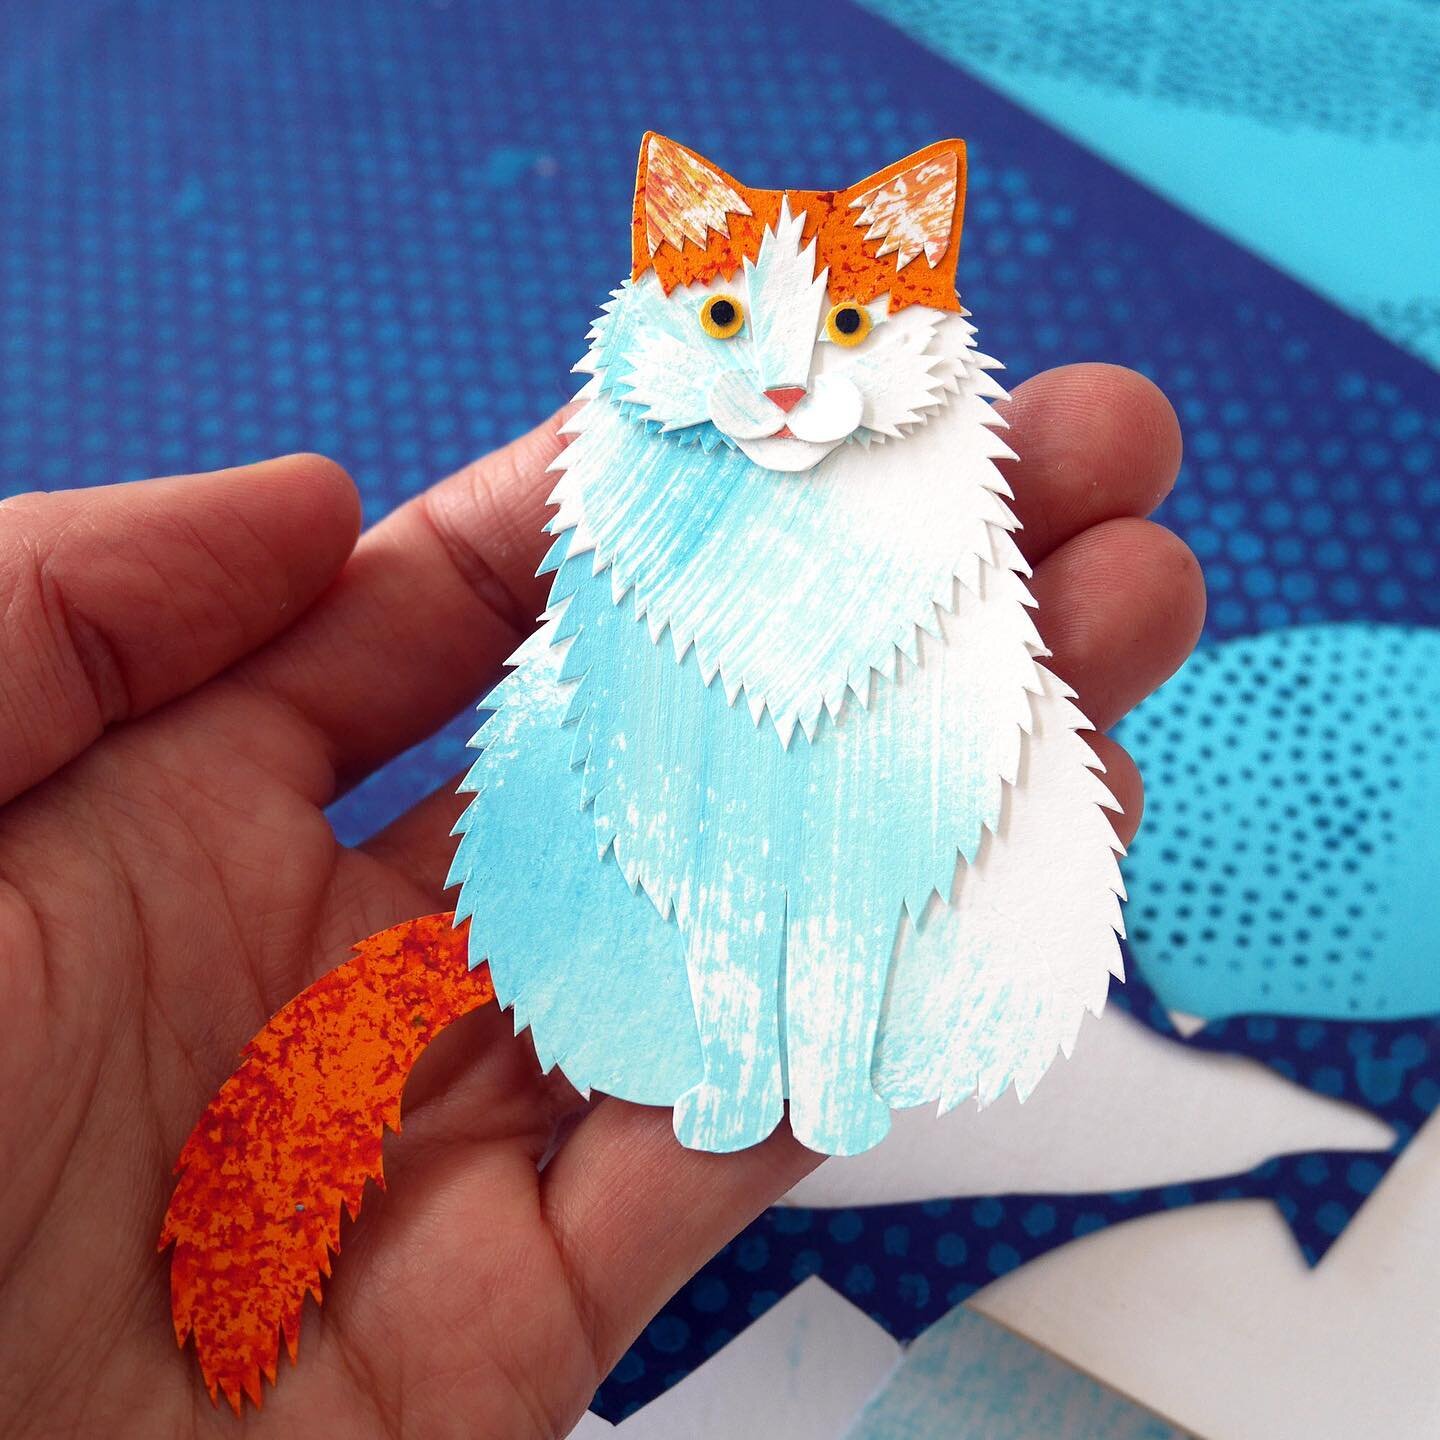 Close-up of Yeti. Soon he&rsquo;ll be seated on his favourite chair.

#yeti #paperillustration #cutpaperillustration #cutpapercollage #cutpaperart #papercat #turkishvancat #turkishvans #turkishvansofinstagram #catportraits #catportrait #papercutcat #